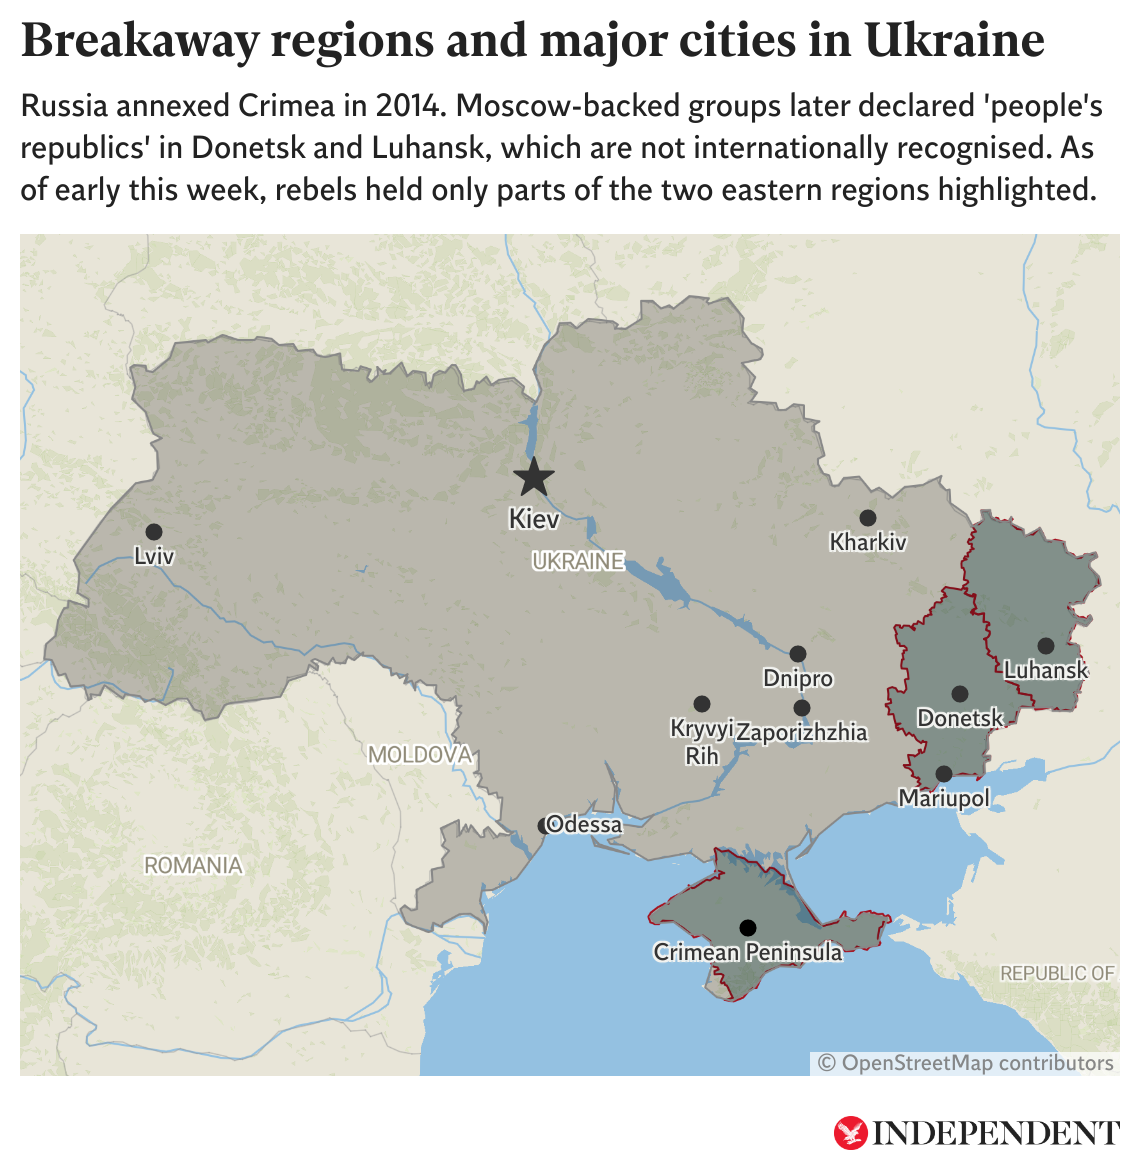 As of early this week, rebels held only parts of the Donetsk and Luhansk regions (highlighted)